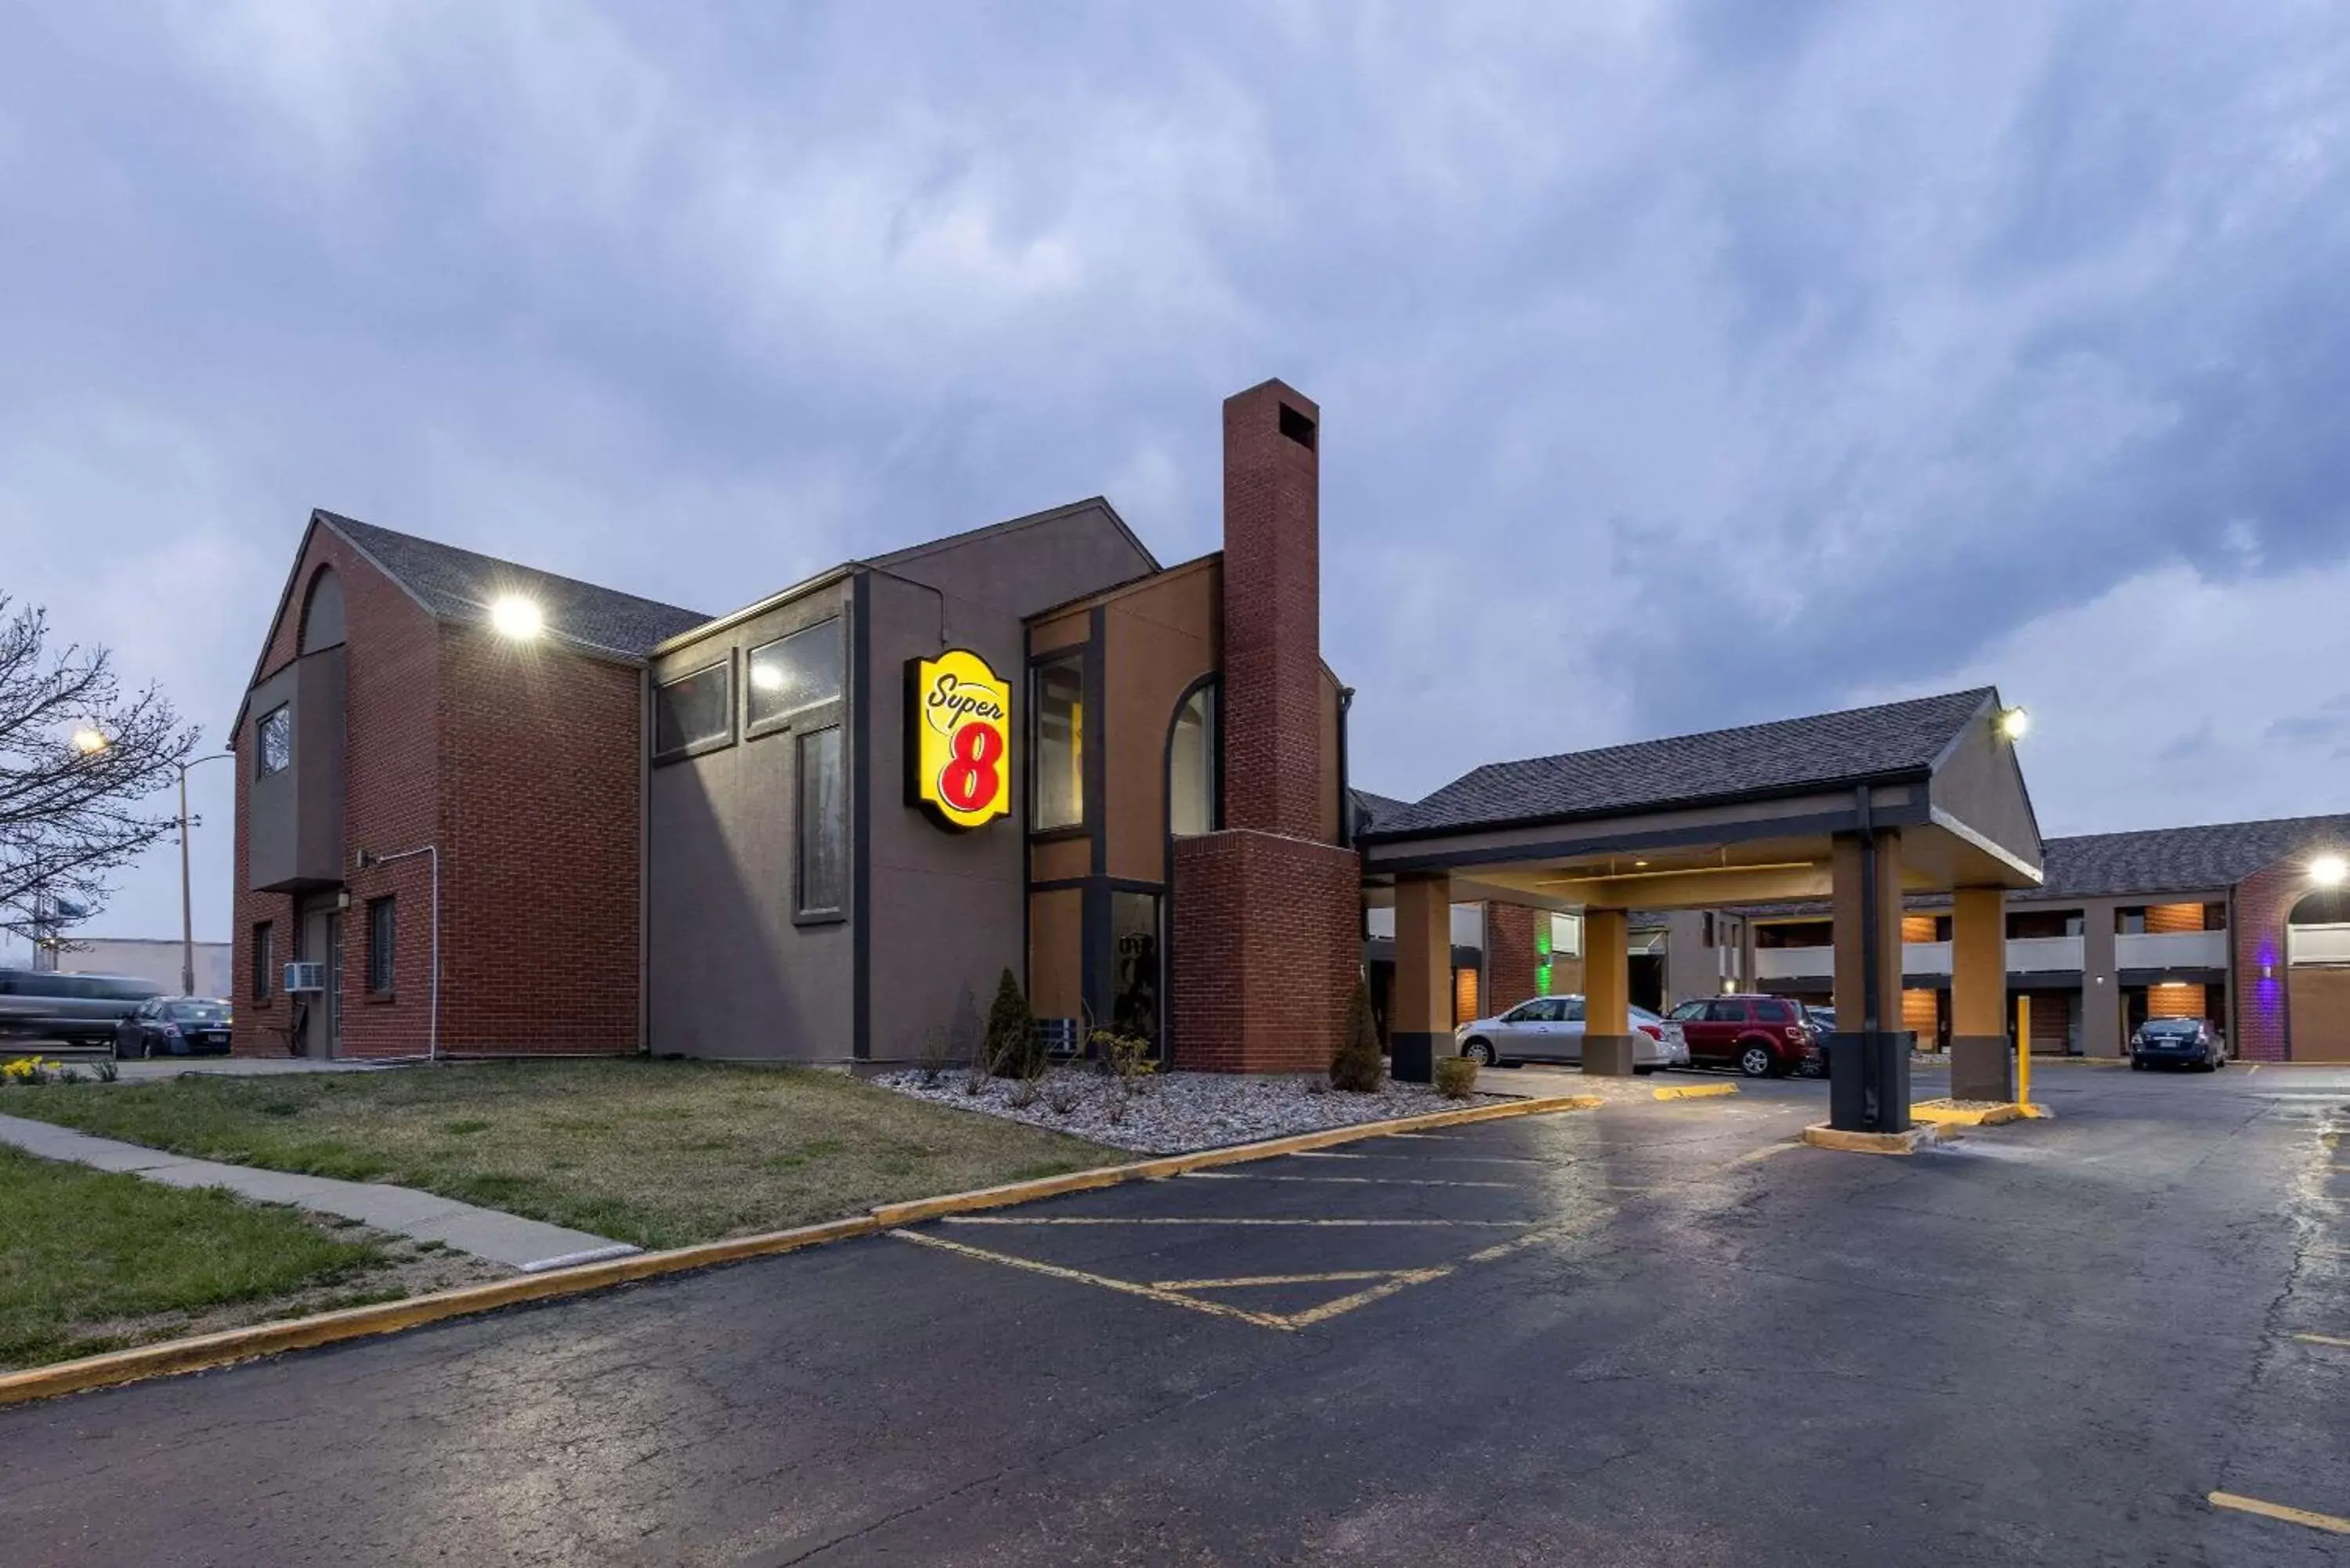 Property Building in Super 8 by Wyndham Kansas City Airport North